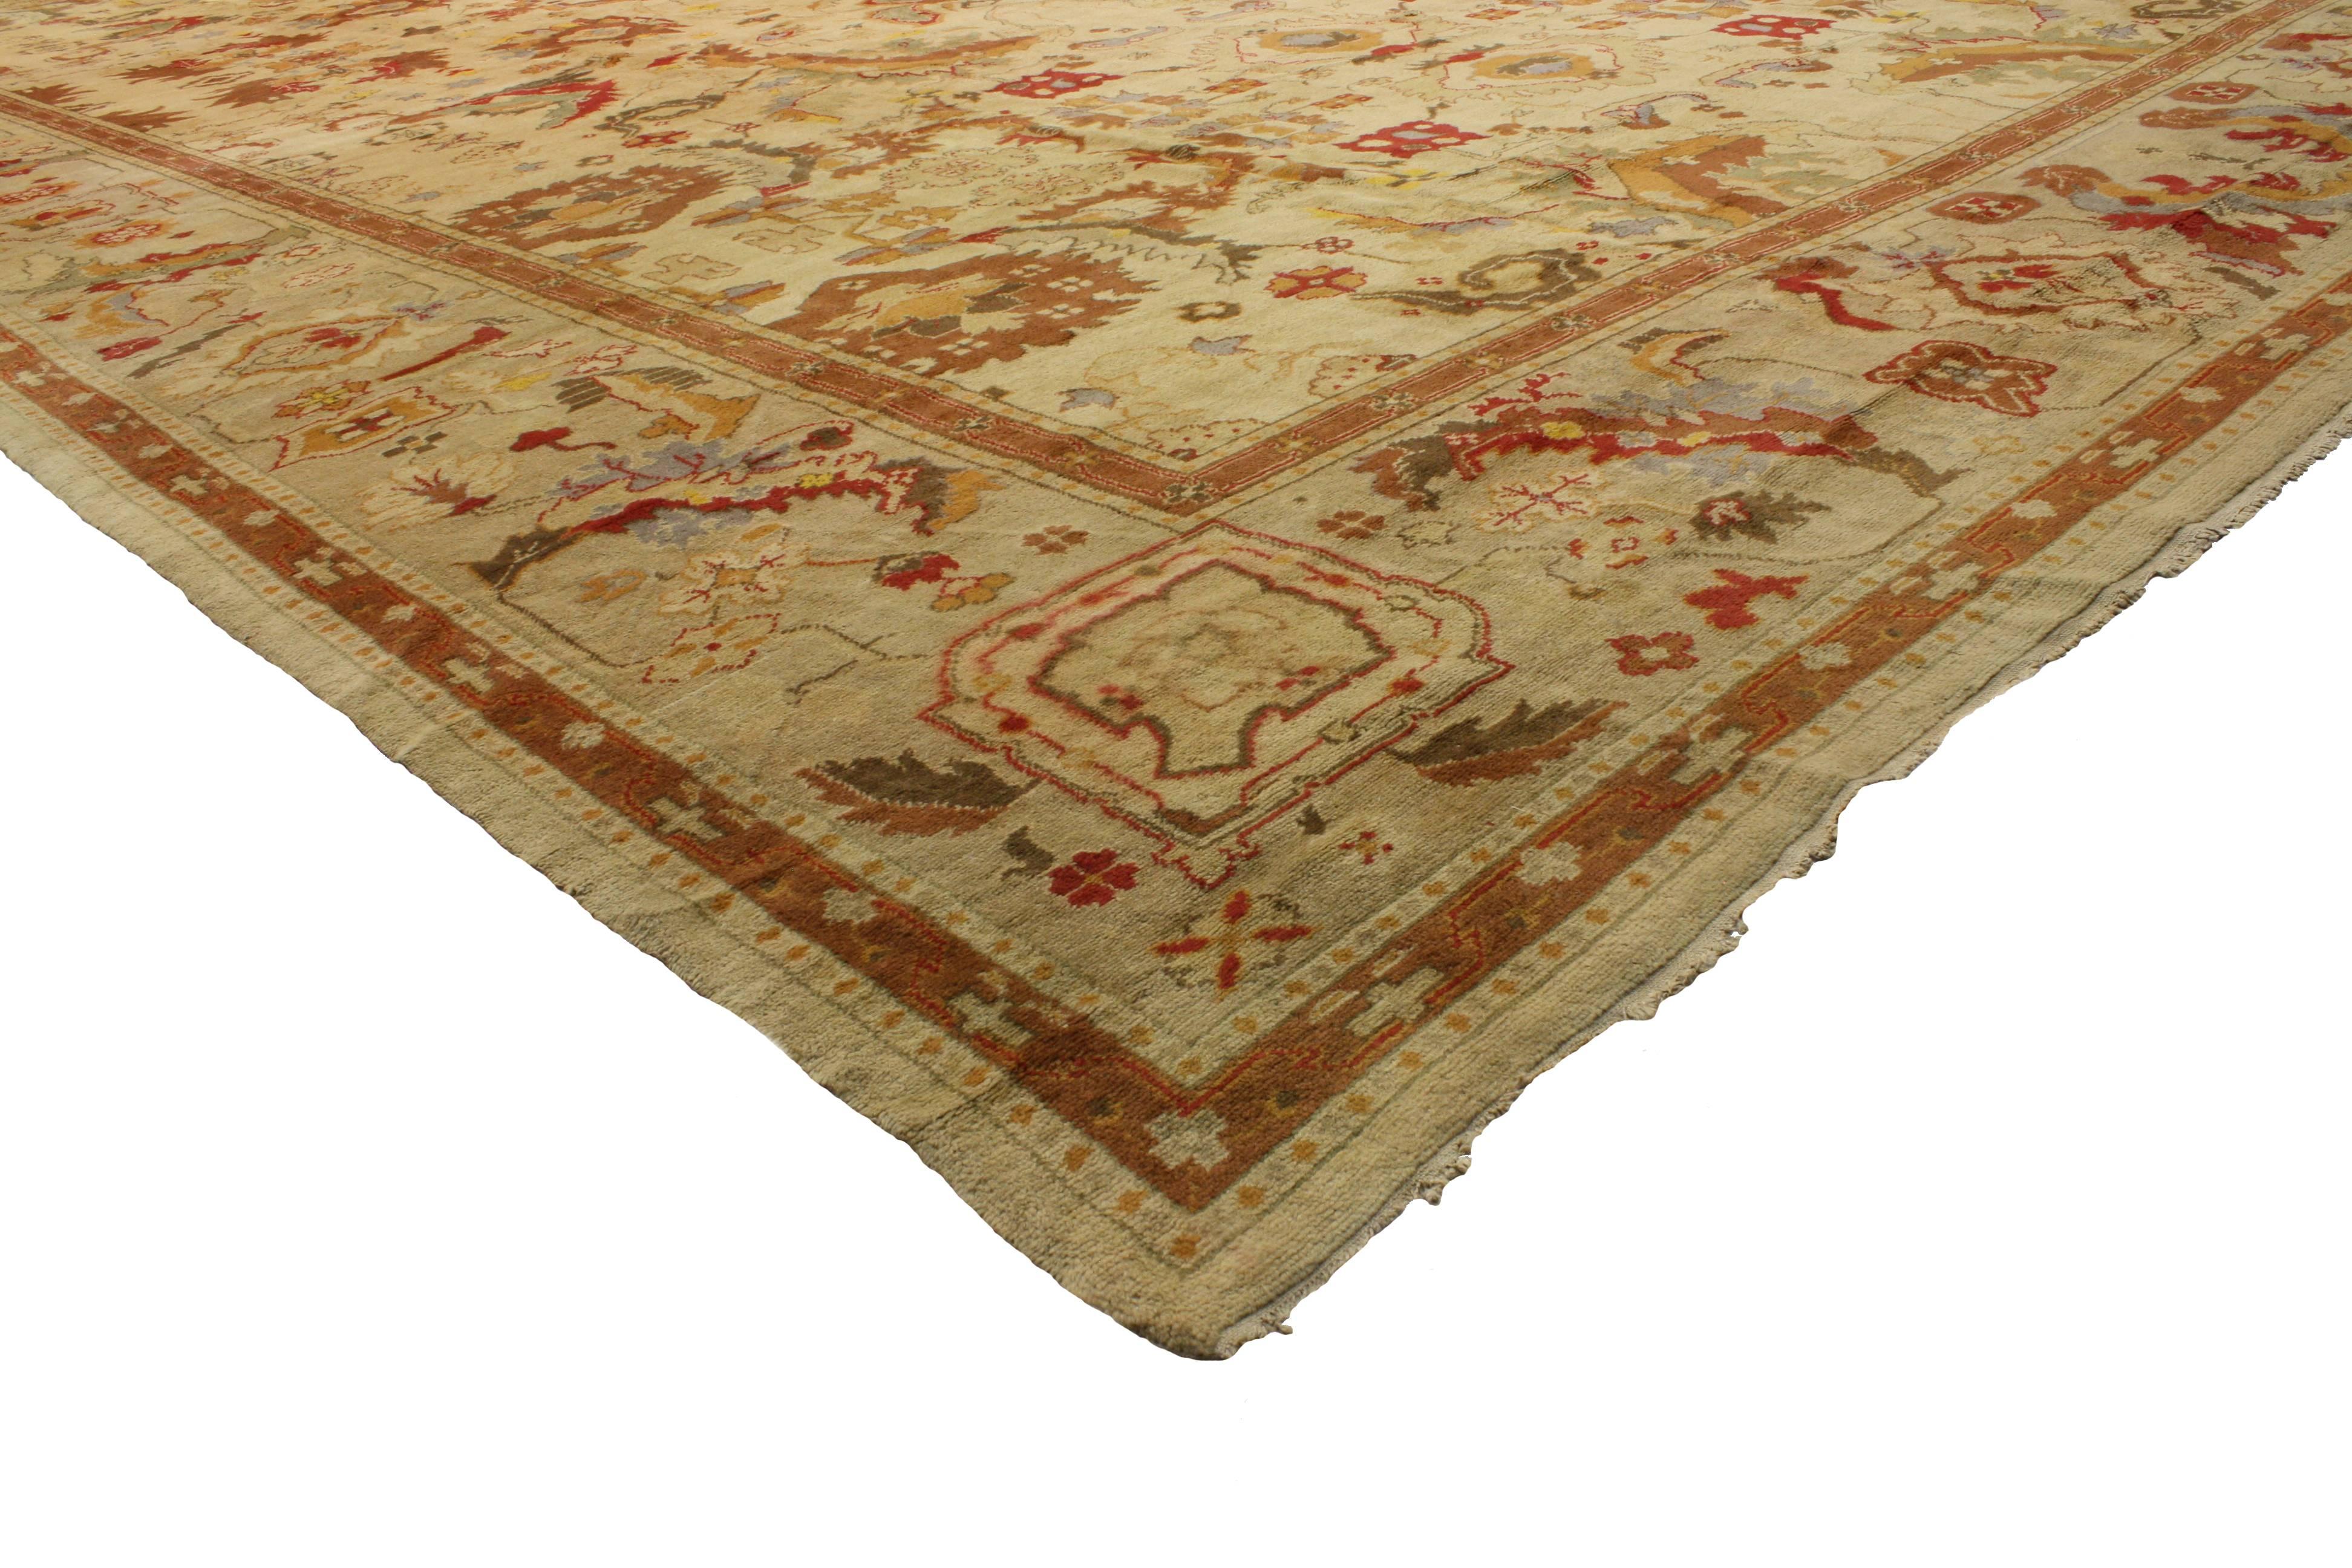 76751 Arts & Craft Style Vintage Portuguese Palace Size Rug, 'Cuenca Carpet'  15'00 x 27'07. This vintage Portuguese palace size rug, also referred as a Cuenca Carpet, from Portugal features an Arts & Crafts style that has held up nicely with the